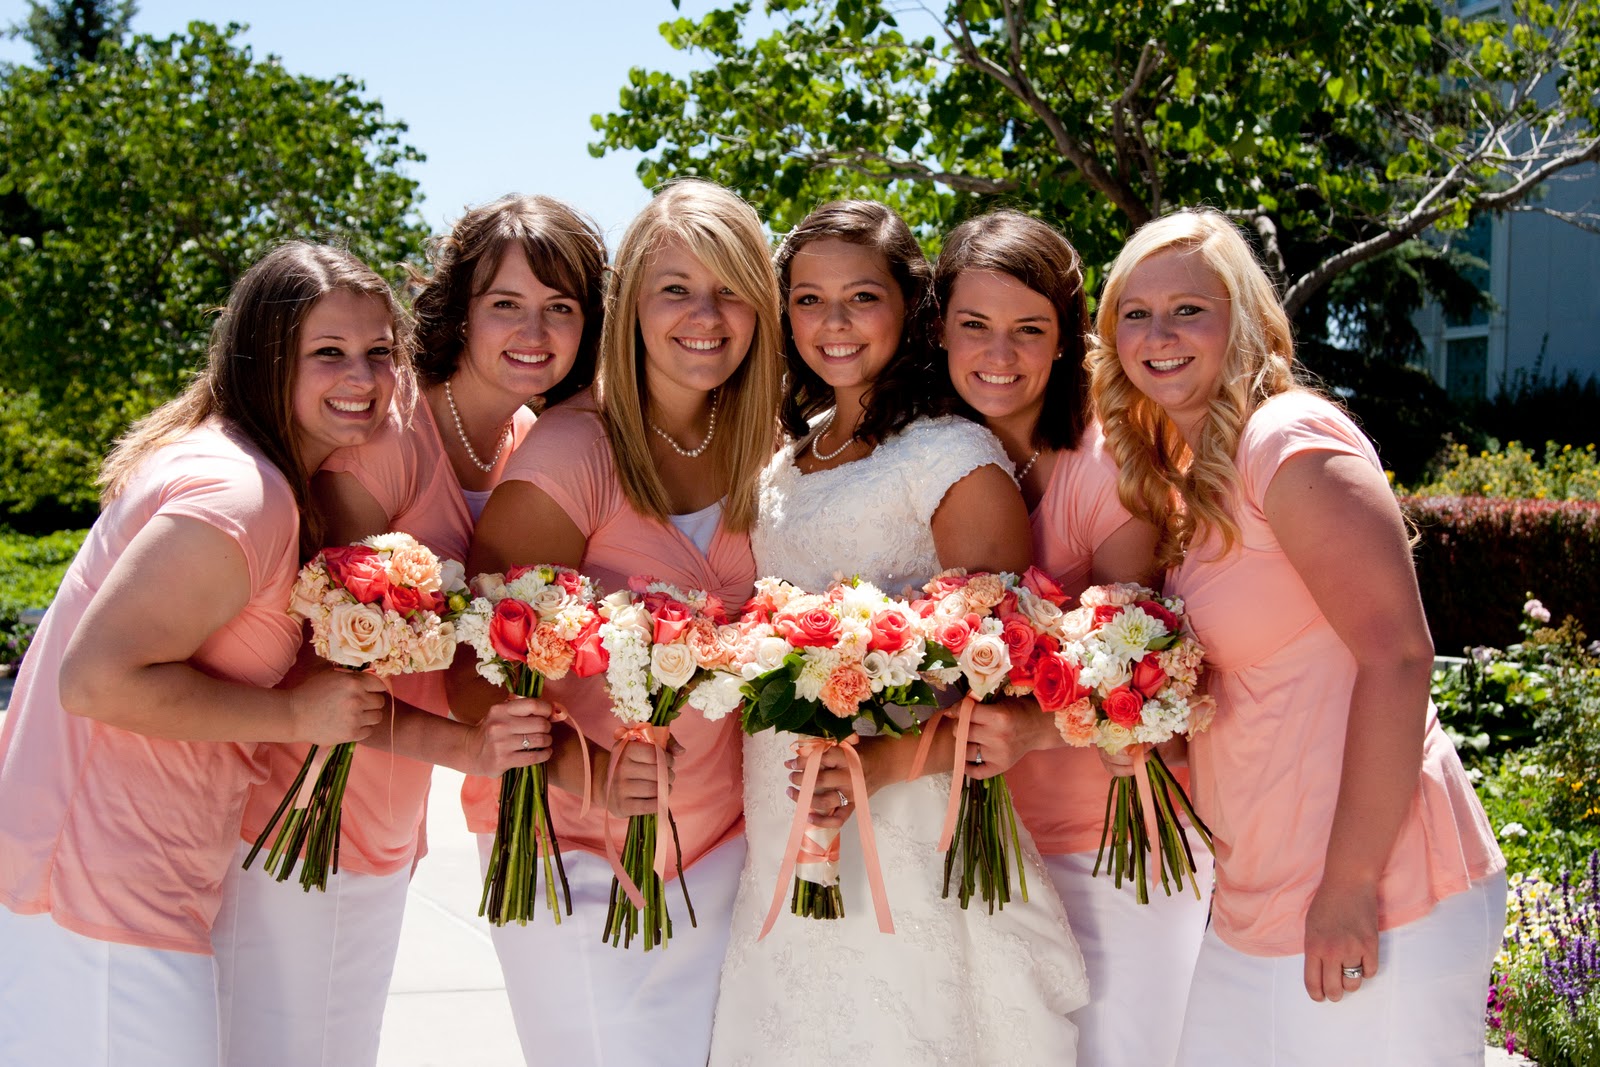 Silver Lining: Wedding Diaries: Meet the Bridal Party